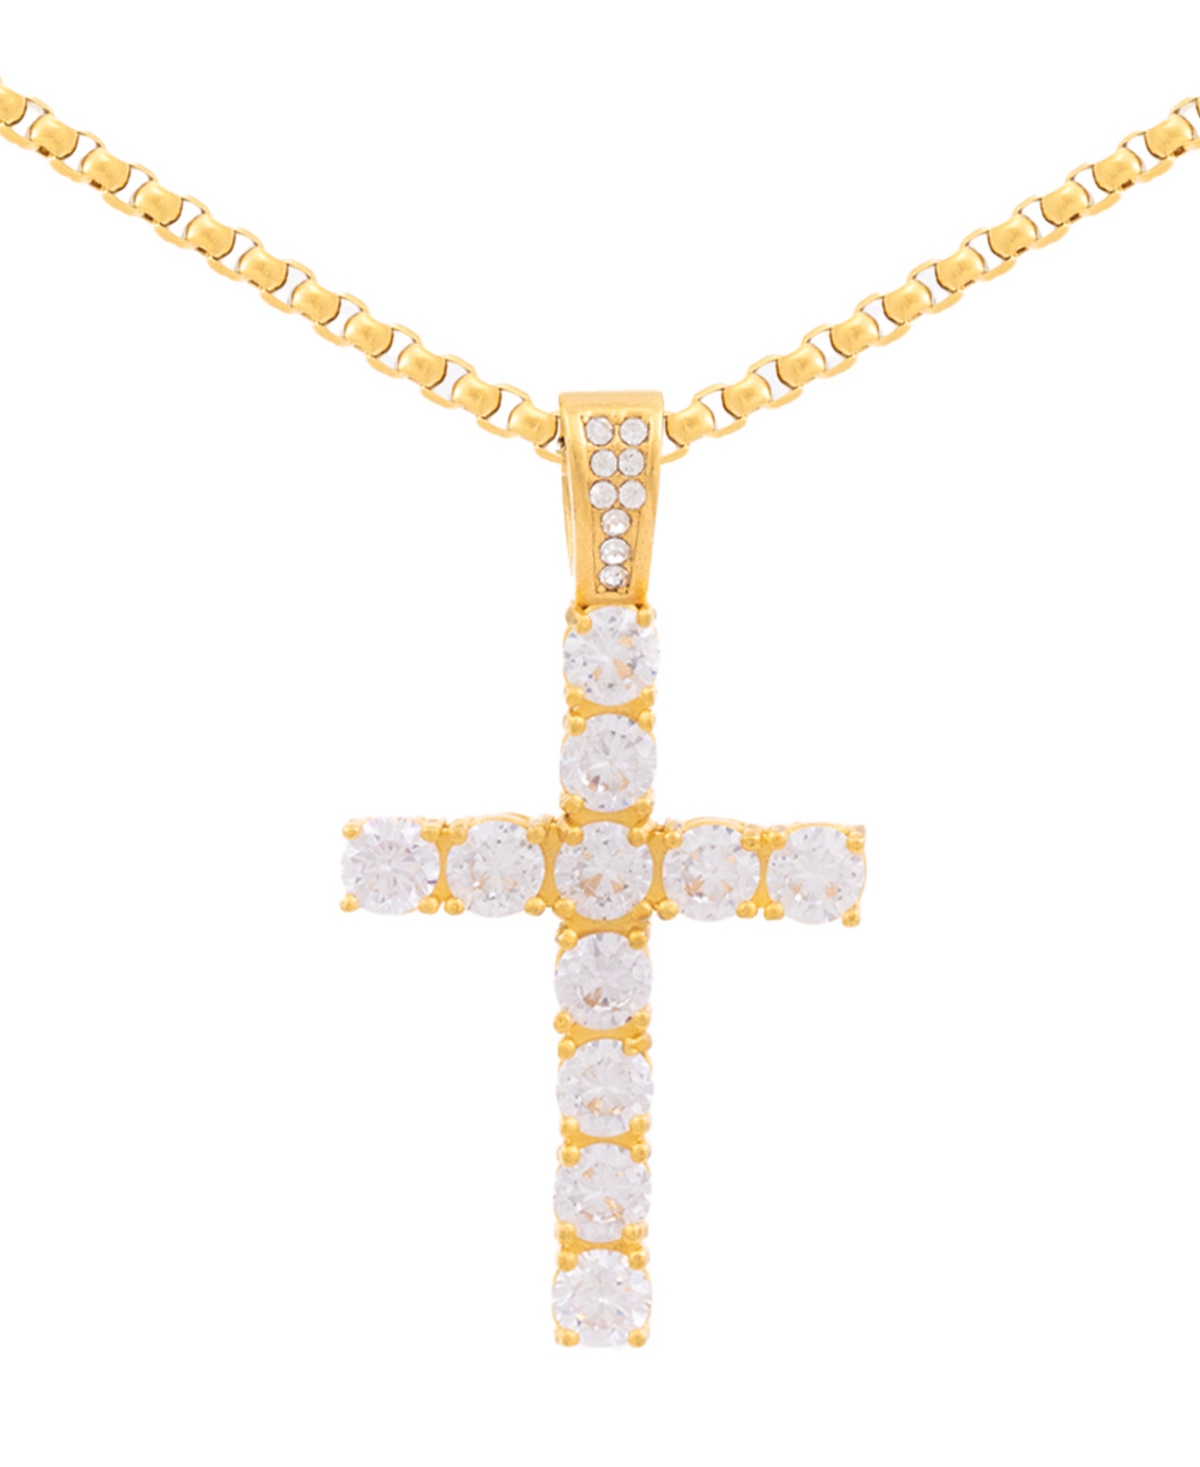 Smith Men's Cubic Zirconia Cross 24" Pendant Necklace in Gold Ion-Plated Stainless Steel - Gold-Tone